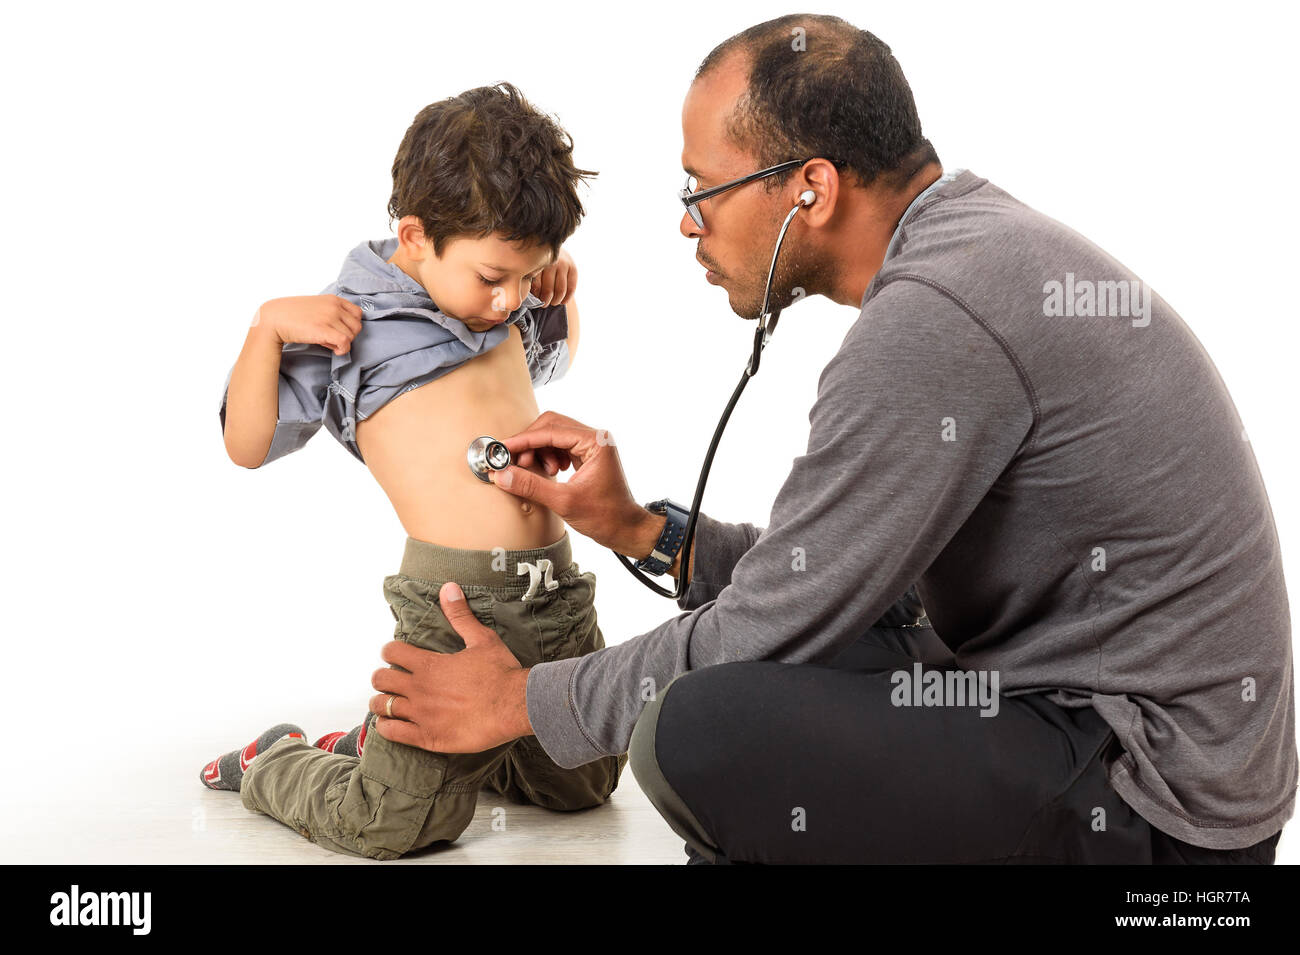 Doctor is checking a boy stomach with a stethoscope. Father and son are playing medical examination at the doctors office. Stock Photo